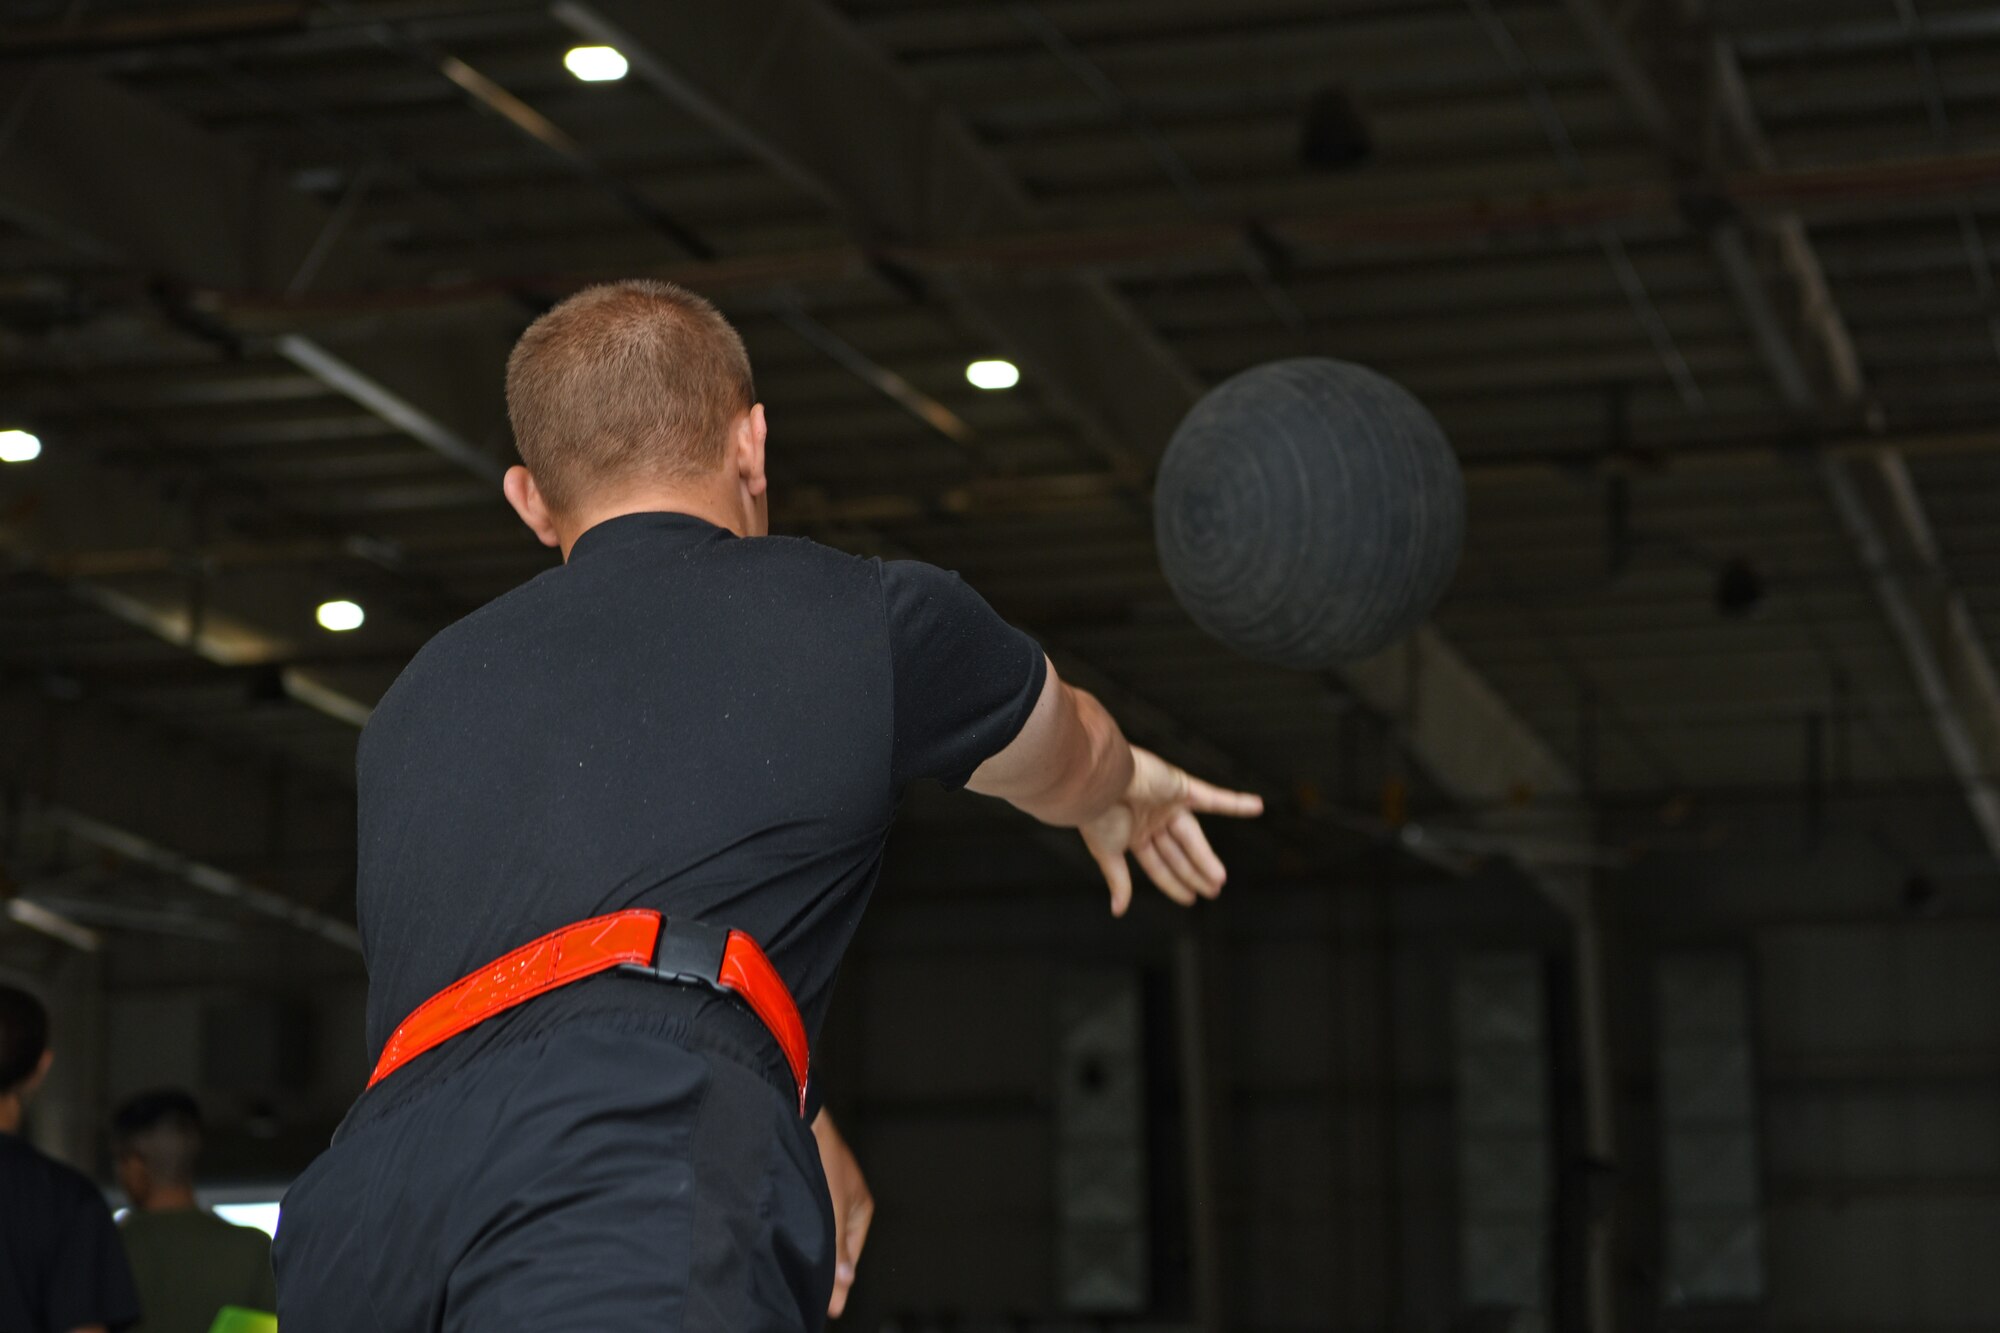 U.S. Army Firefighter Detachment student assigned to the 169th Engineer Battalion, throws a medicine ball for an evaluation, on Goodfellow Air Force Base, Texas, June 30, 2021. Firefighter students were assessed before they started their course by a physical therapist to fix lifting mechanics or strength deficits to prevent injury. (U.S. Air Force photo by Senior Airman Abbey Rieves)